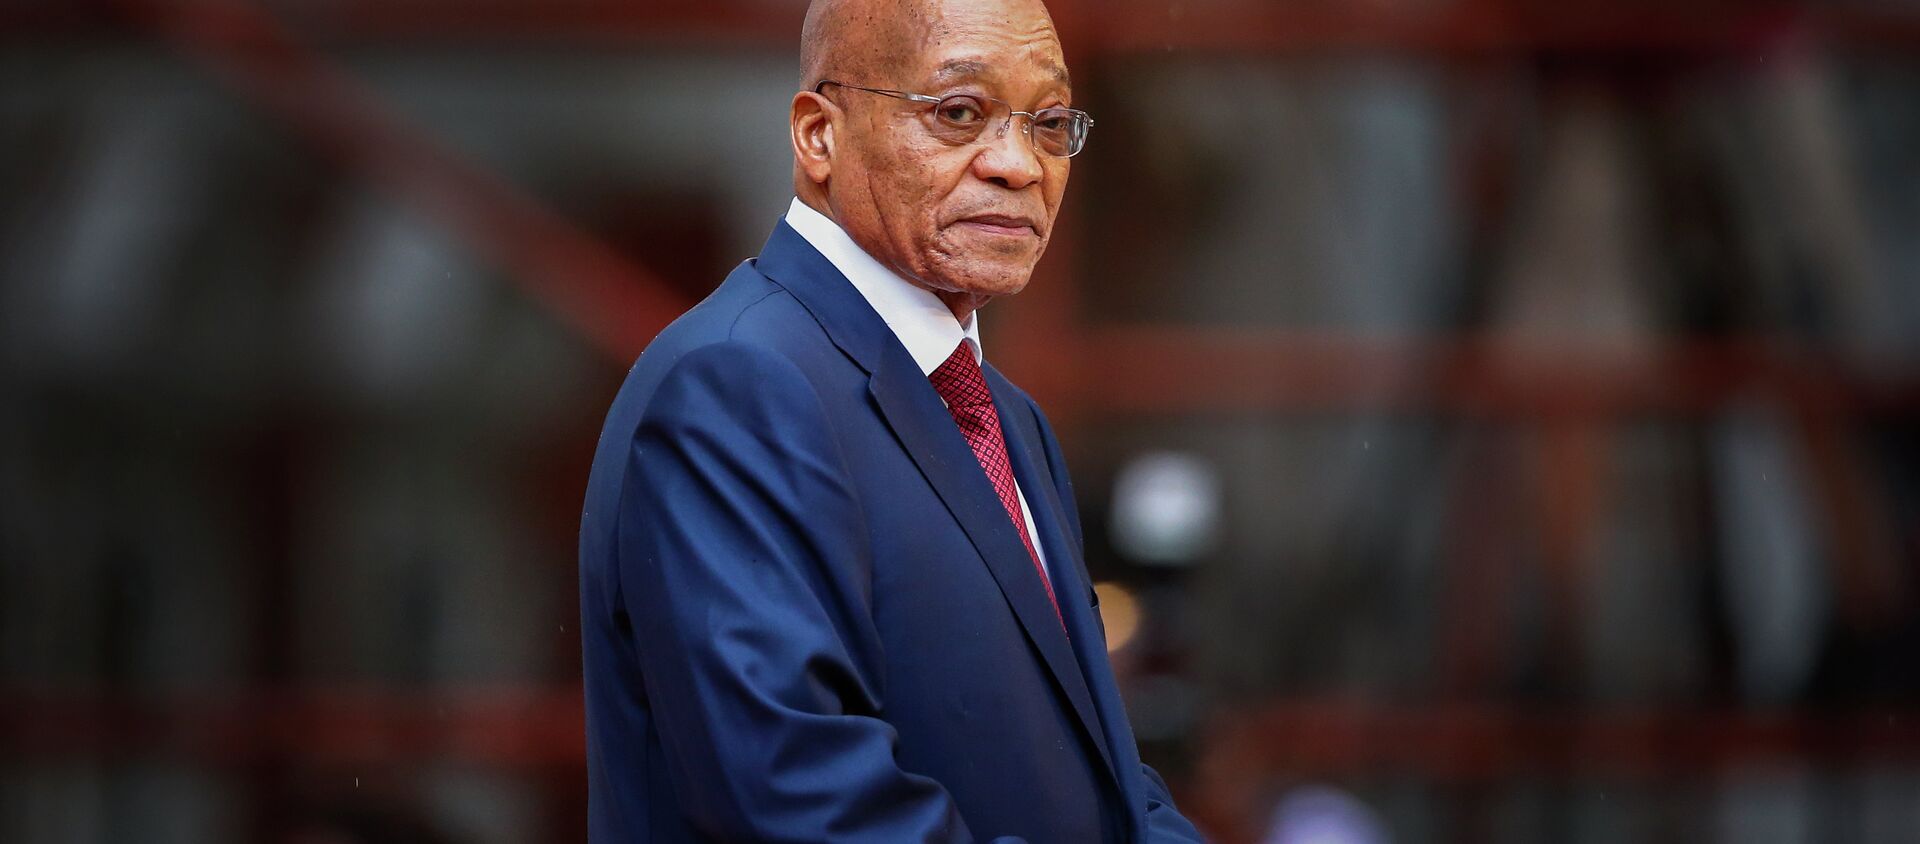 South African president, Jacob Zuma, arrives for the formal opening of parliament in Cape Town on February 12, 2015 - Sputnik International, 1920, 15.02.2018